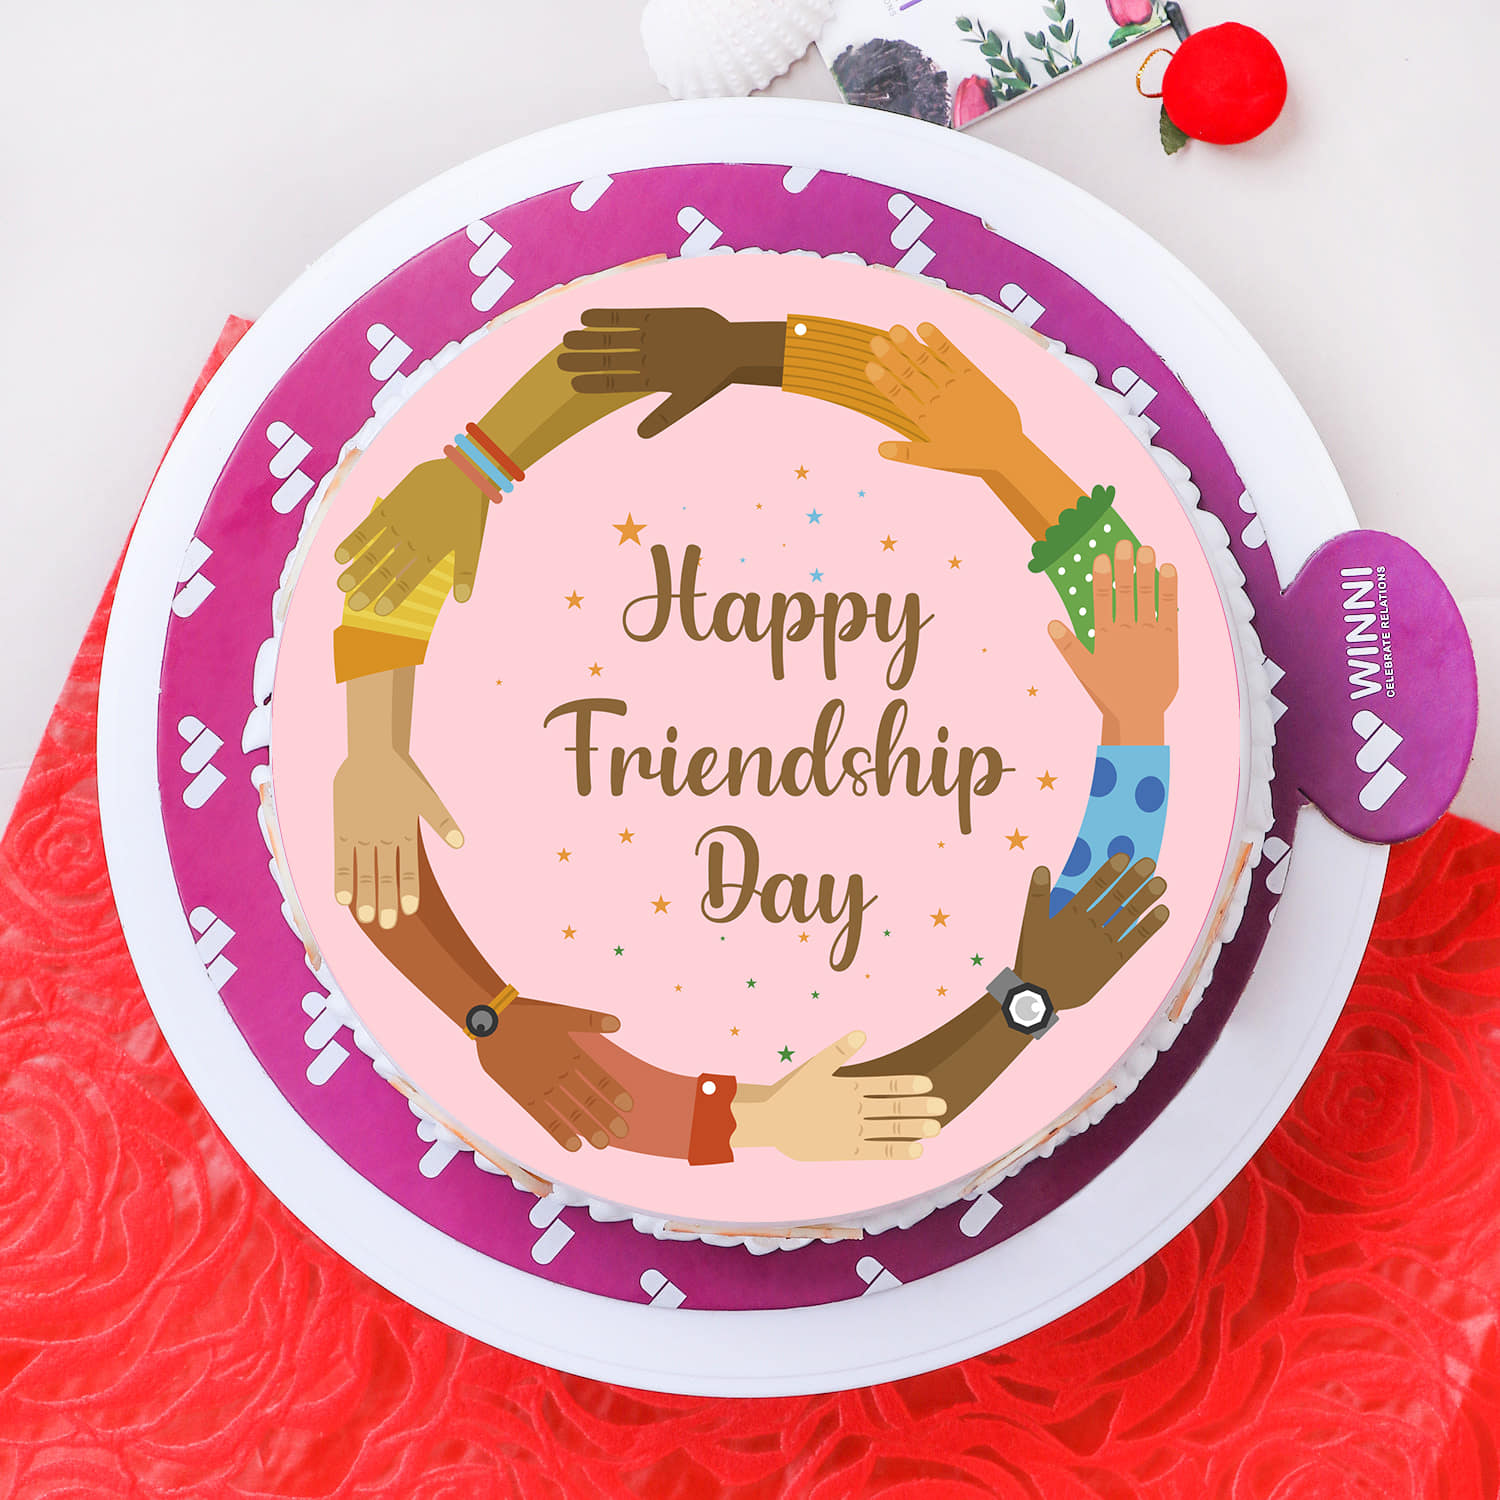 Buy Festiko® 10 Pcs Happy Friendship Day Cupcake Topper, Cake Decoration  Supplies, Friend's Day Celebration Supplies Online at Low Prices in India -  Amazon.in